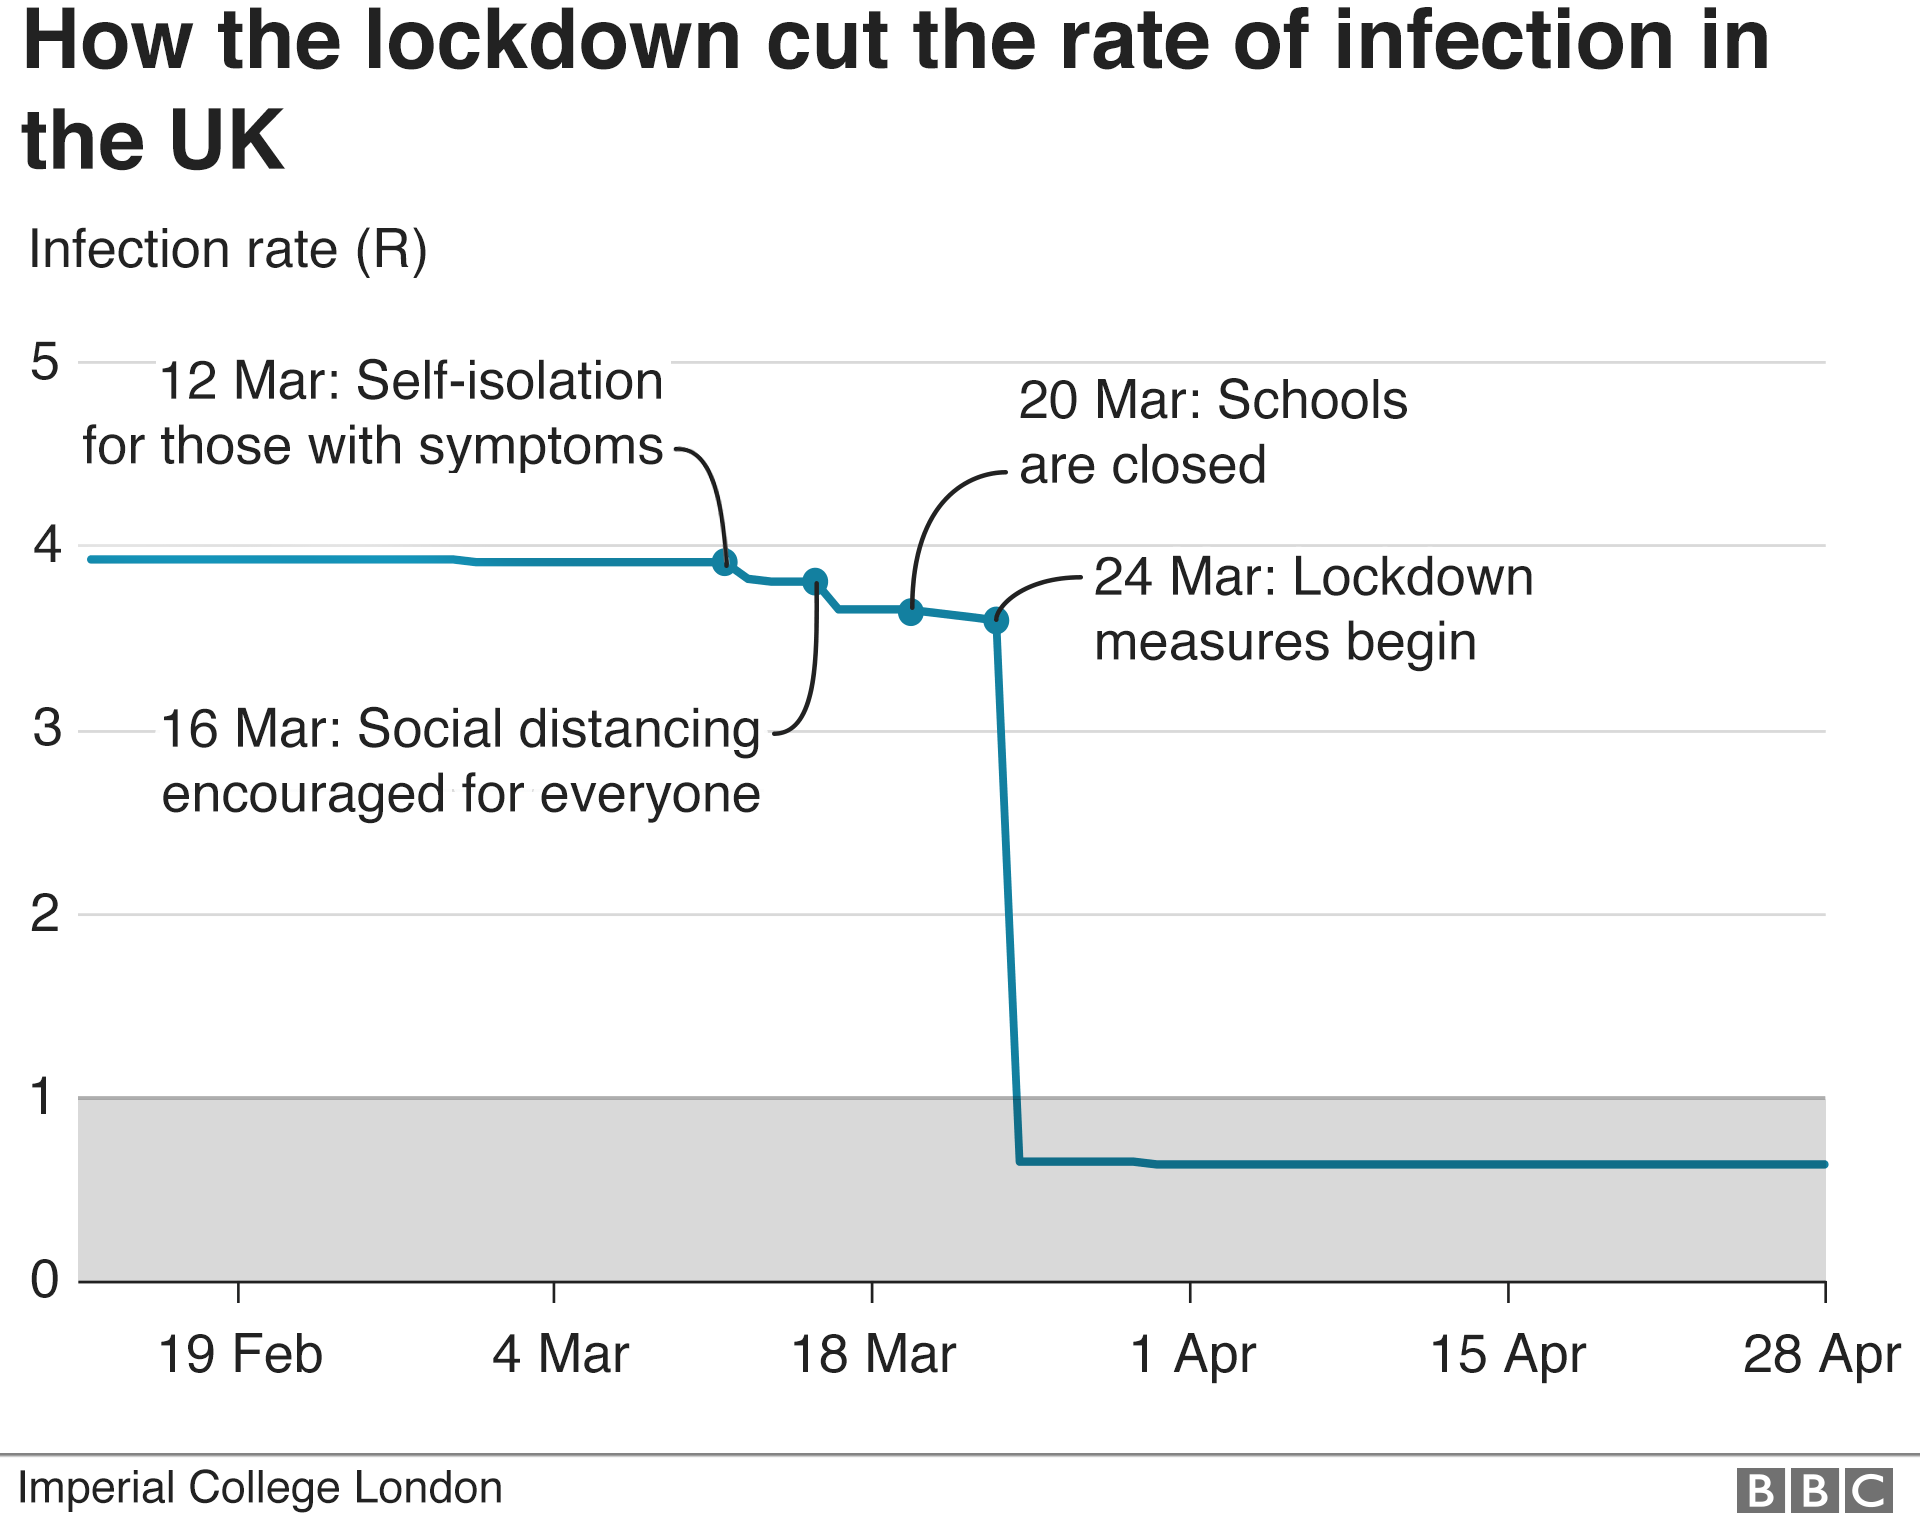 UK infection rate R and lockdown - enlarge